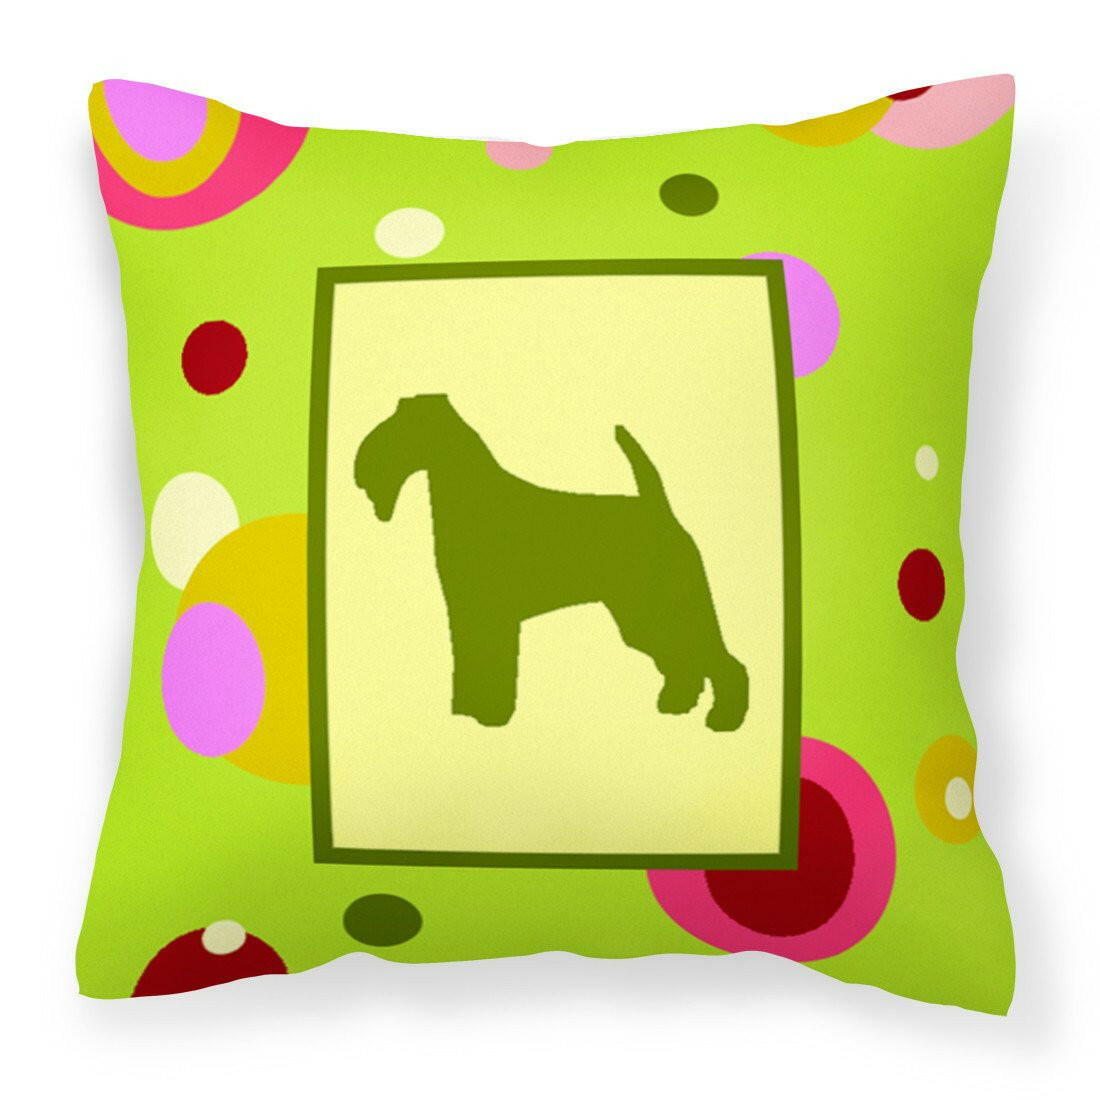 Lime Green Dots Welsh Terrier Fabric Decorative Pillow CK1069PW1414 by Caroline's Treasures